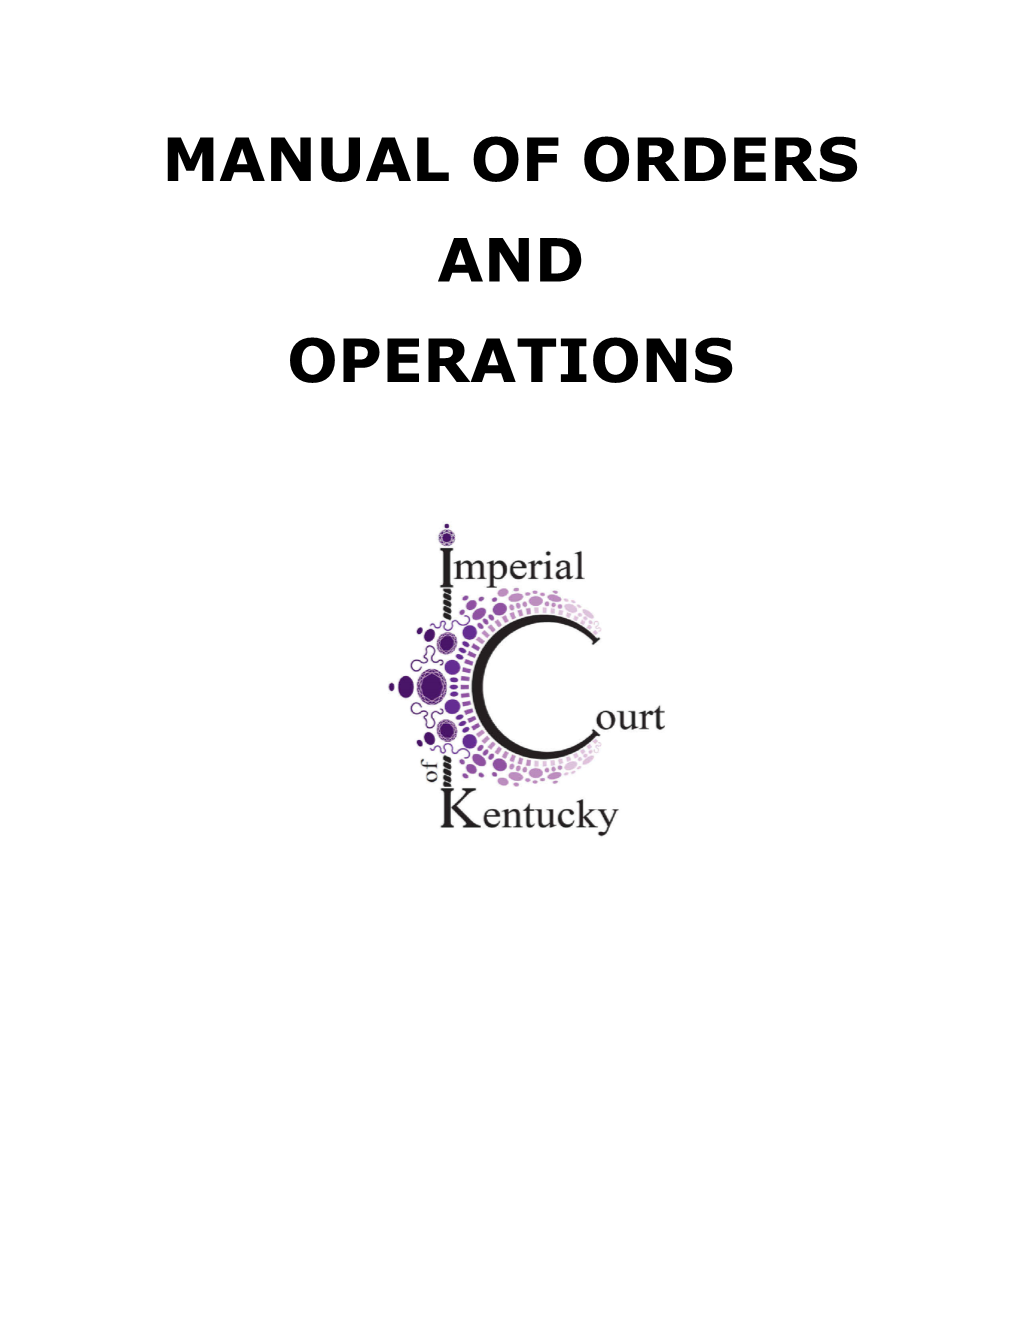 Manual of Orders and Operations